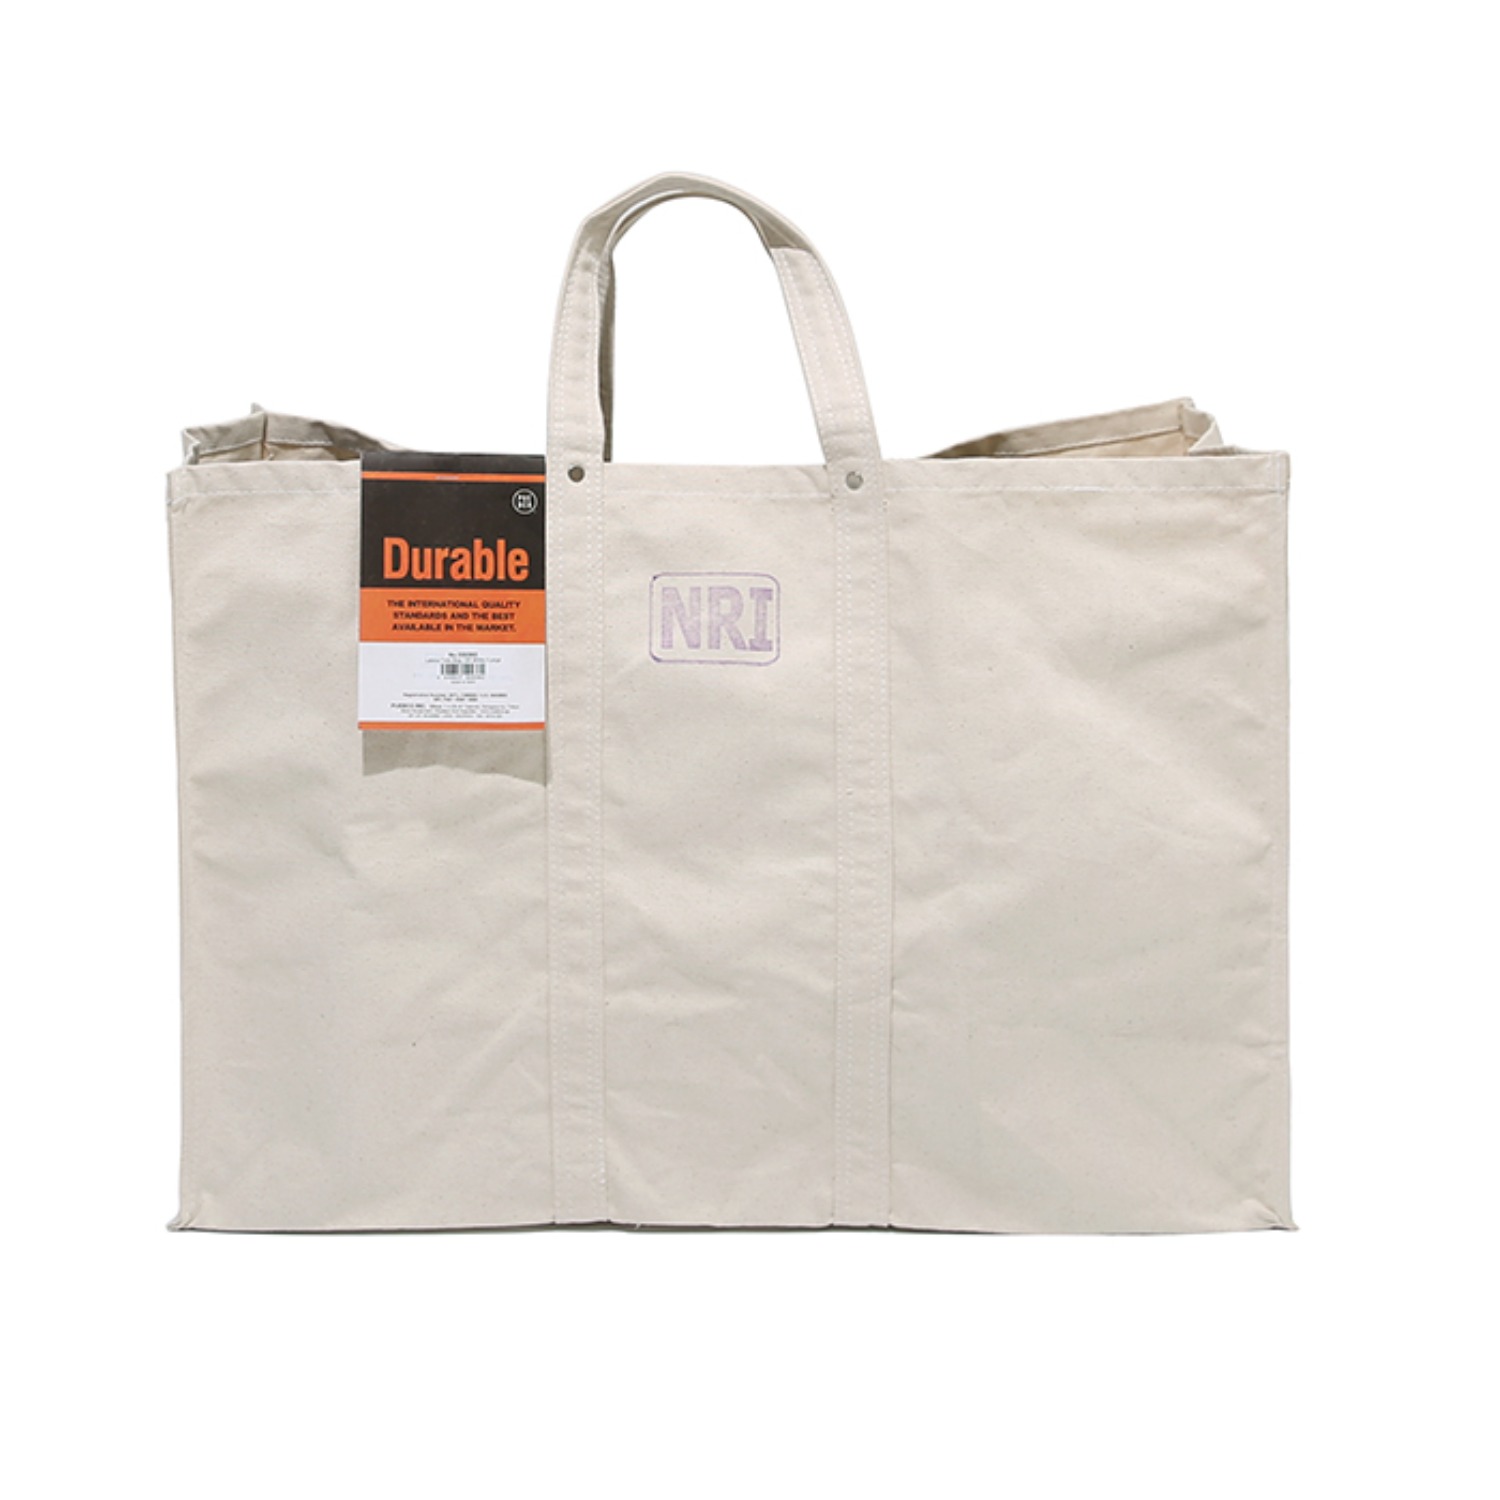 labour tote bag large off white